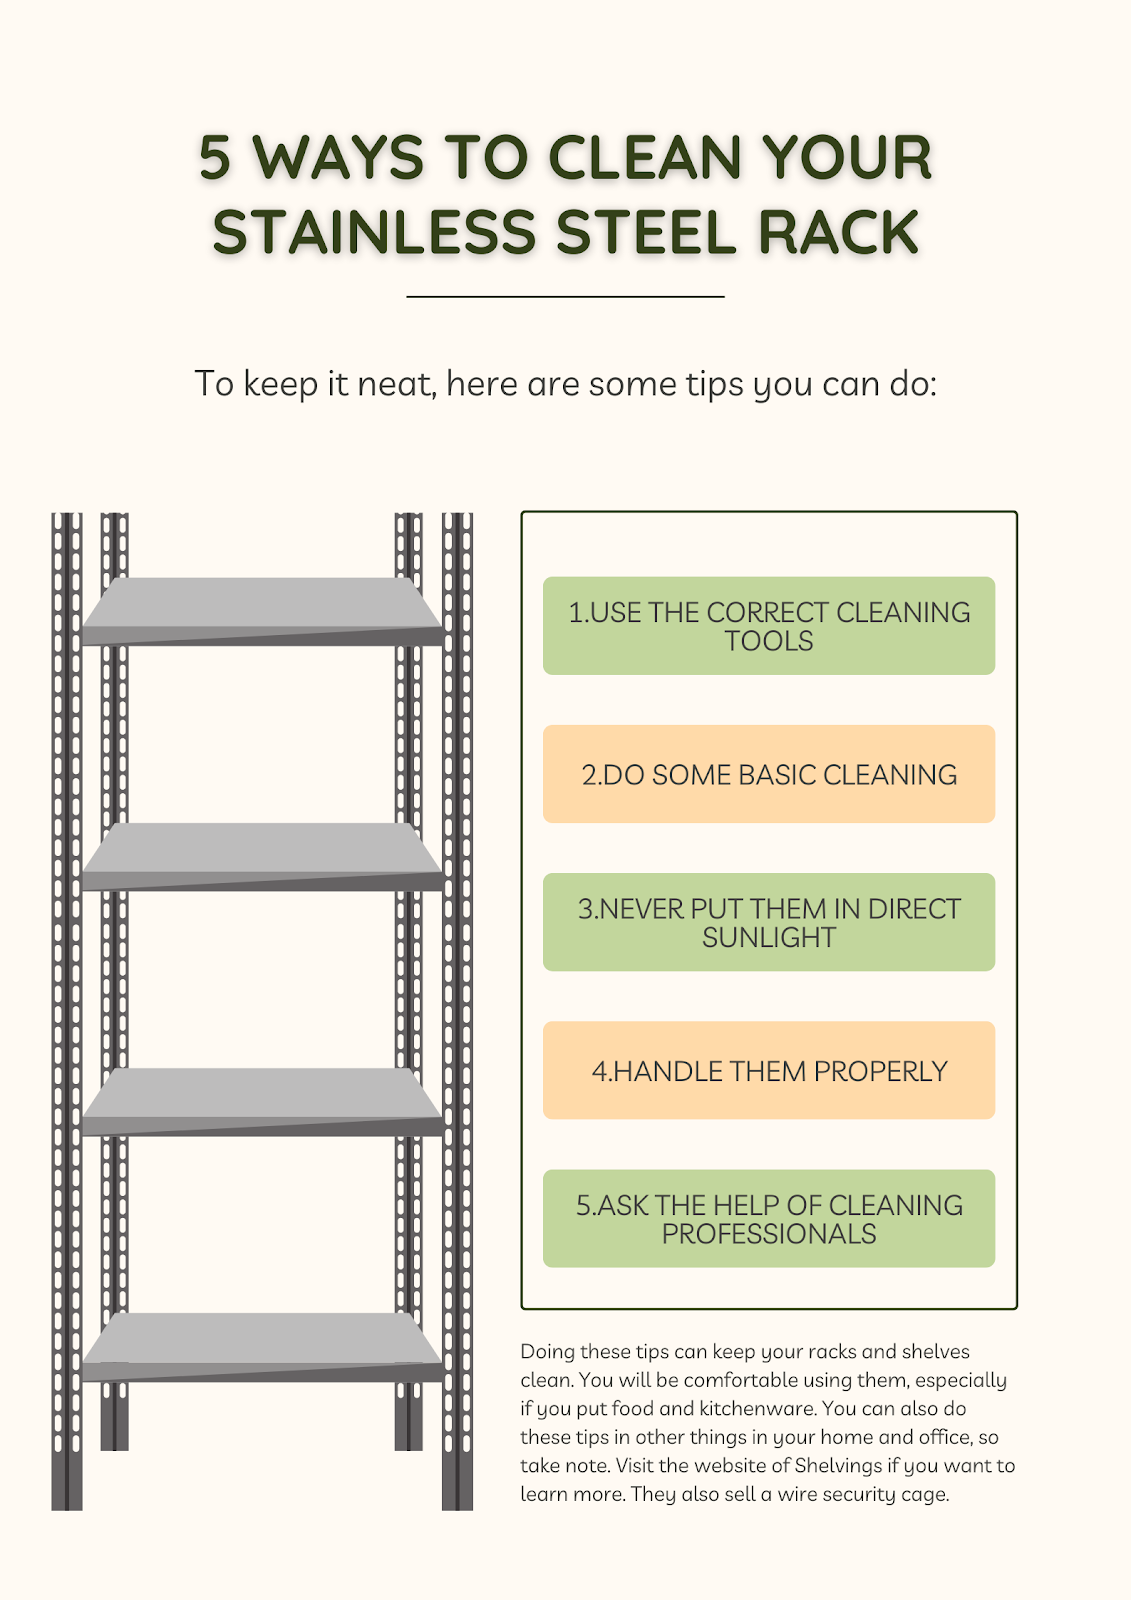 5 Ways To Clean Your Stainless Steel Rack